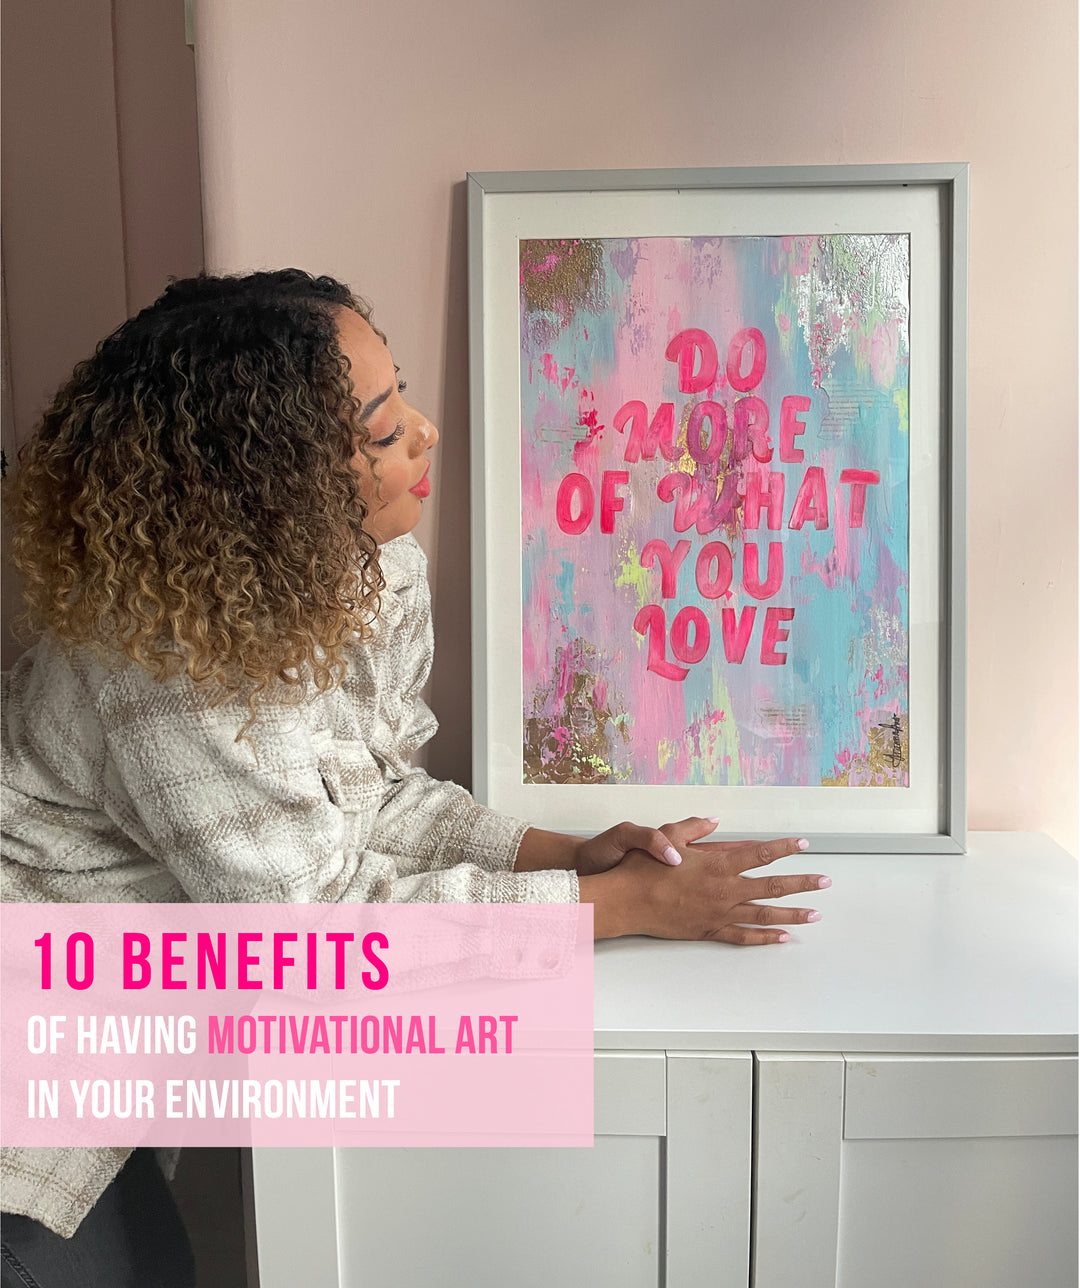 10 Benefits of having motivational art in your environment